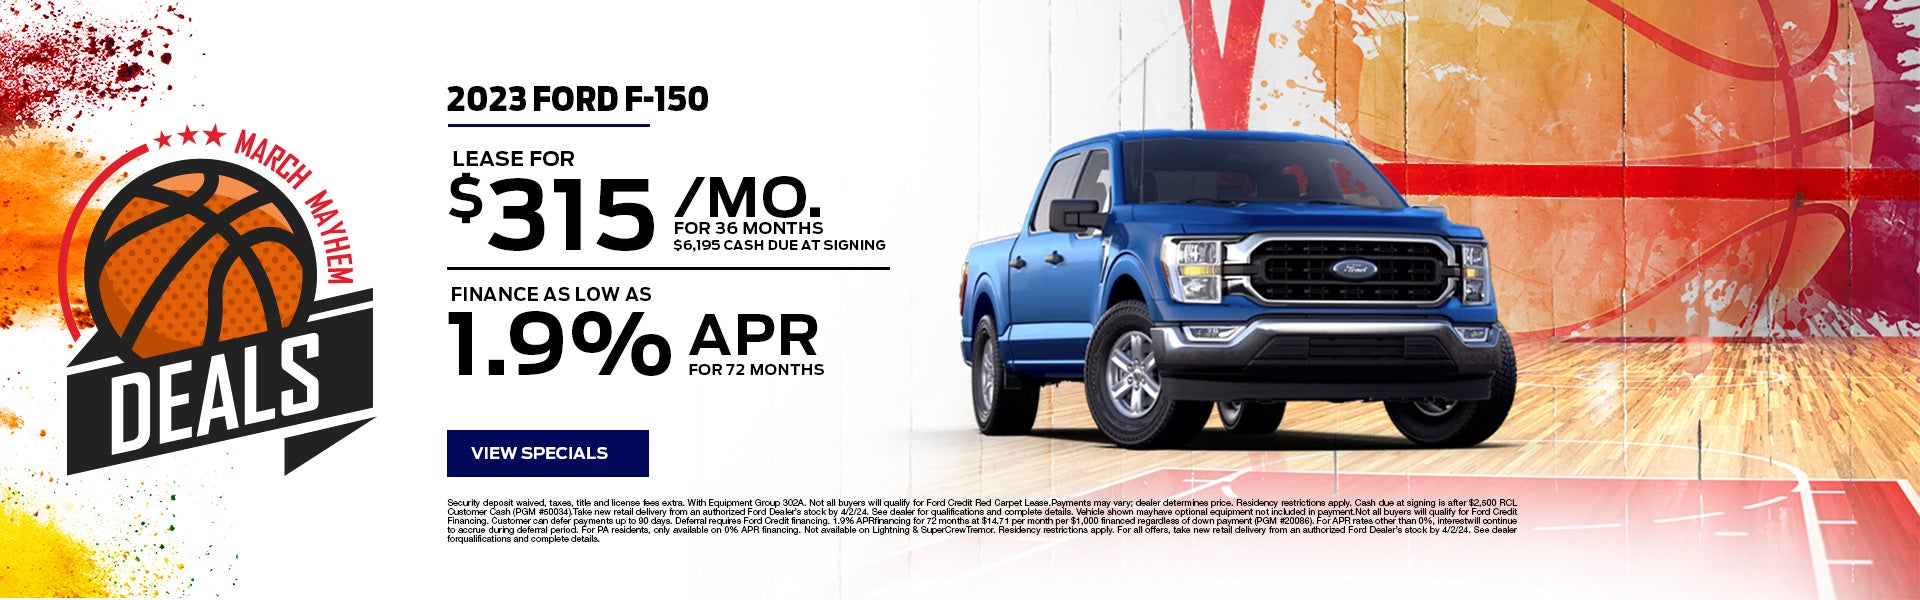 2023 Ford F-150 Offers